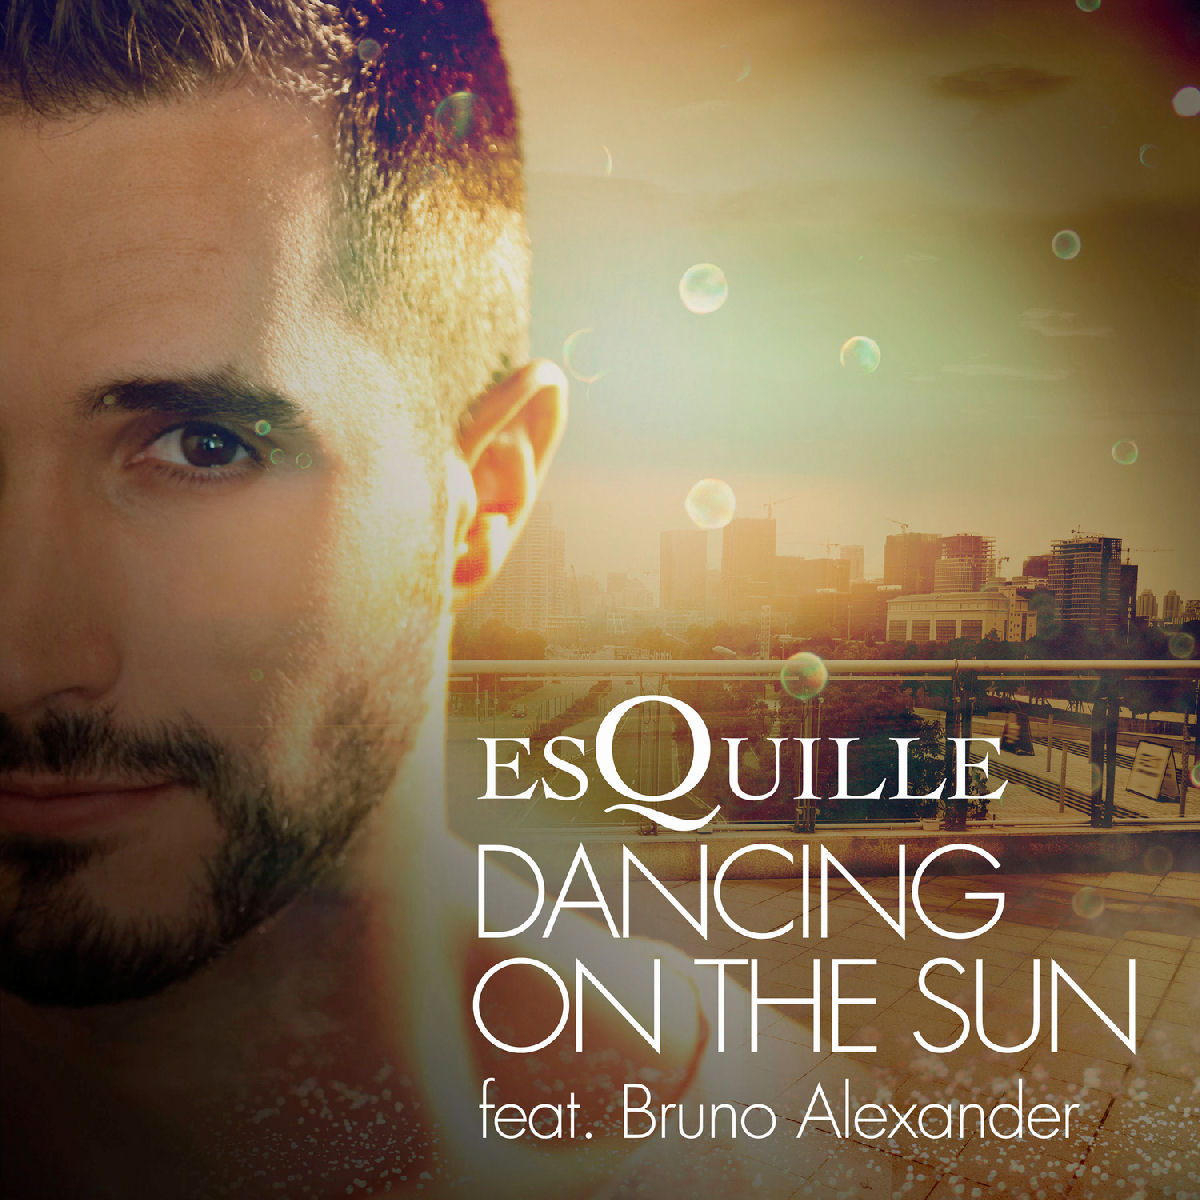  EsQuille – “Dancing On The Sun” (Feat. Bruno Alexander)